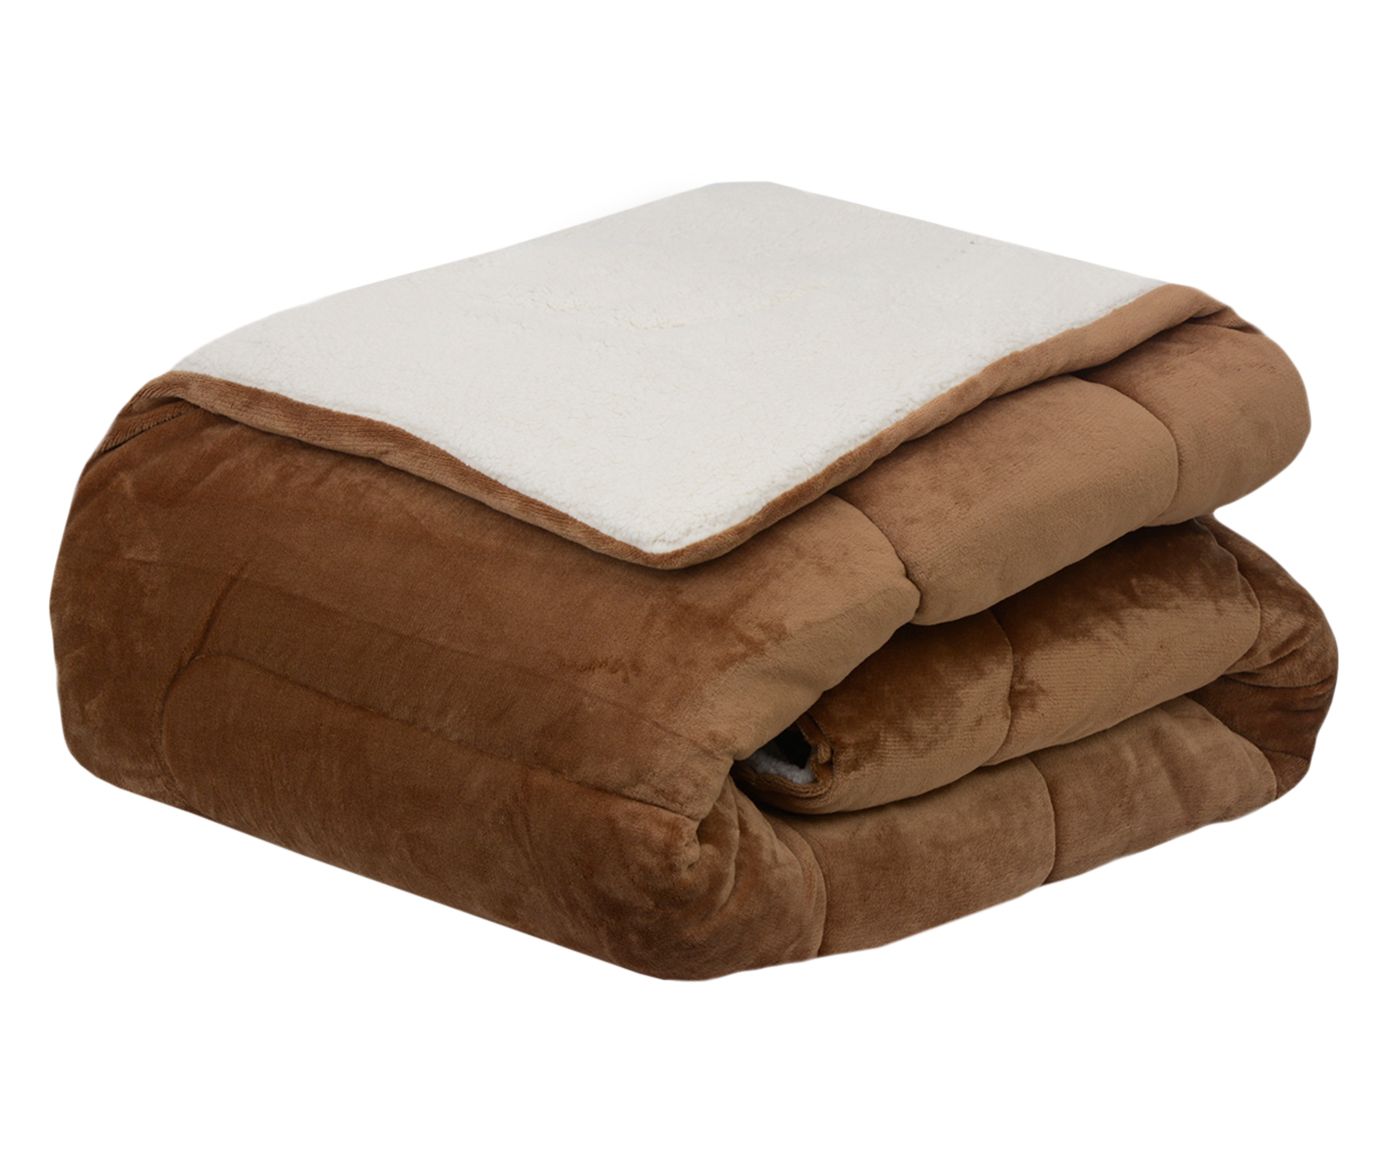 Cobre-Leito Flannel Sherpa Cappuccino 200G/M² - Queen Size | Westwing.com.br